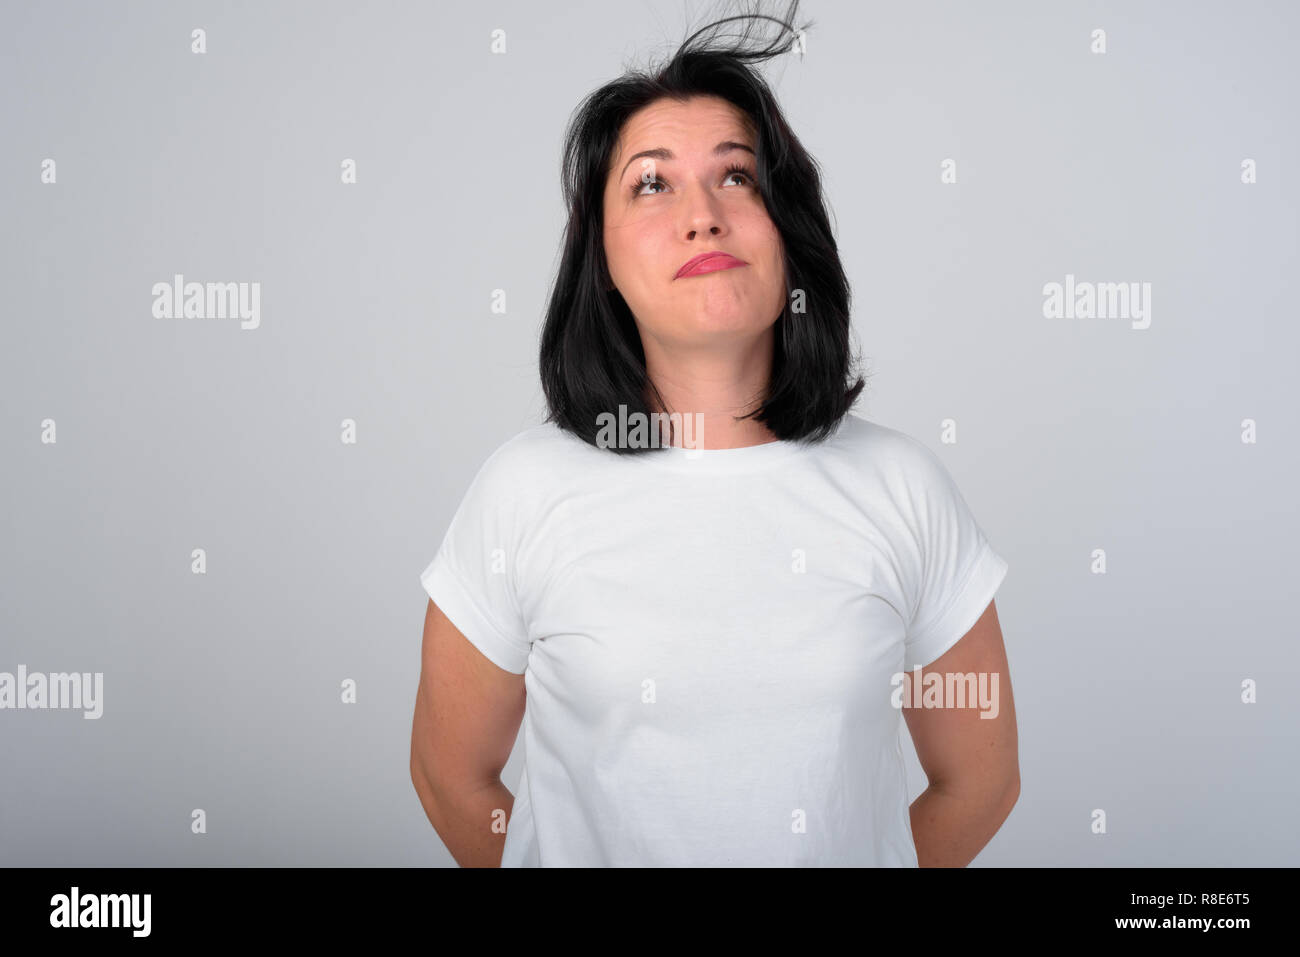 Beautiful Woman Blowing Hair Against White Background Stock Photo Alamy